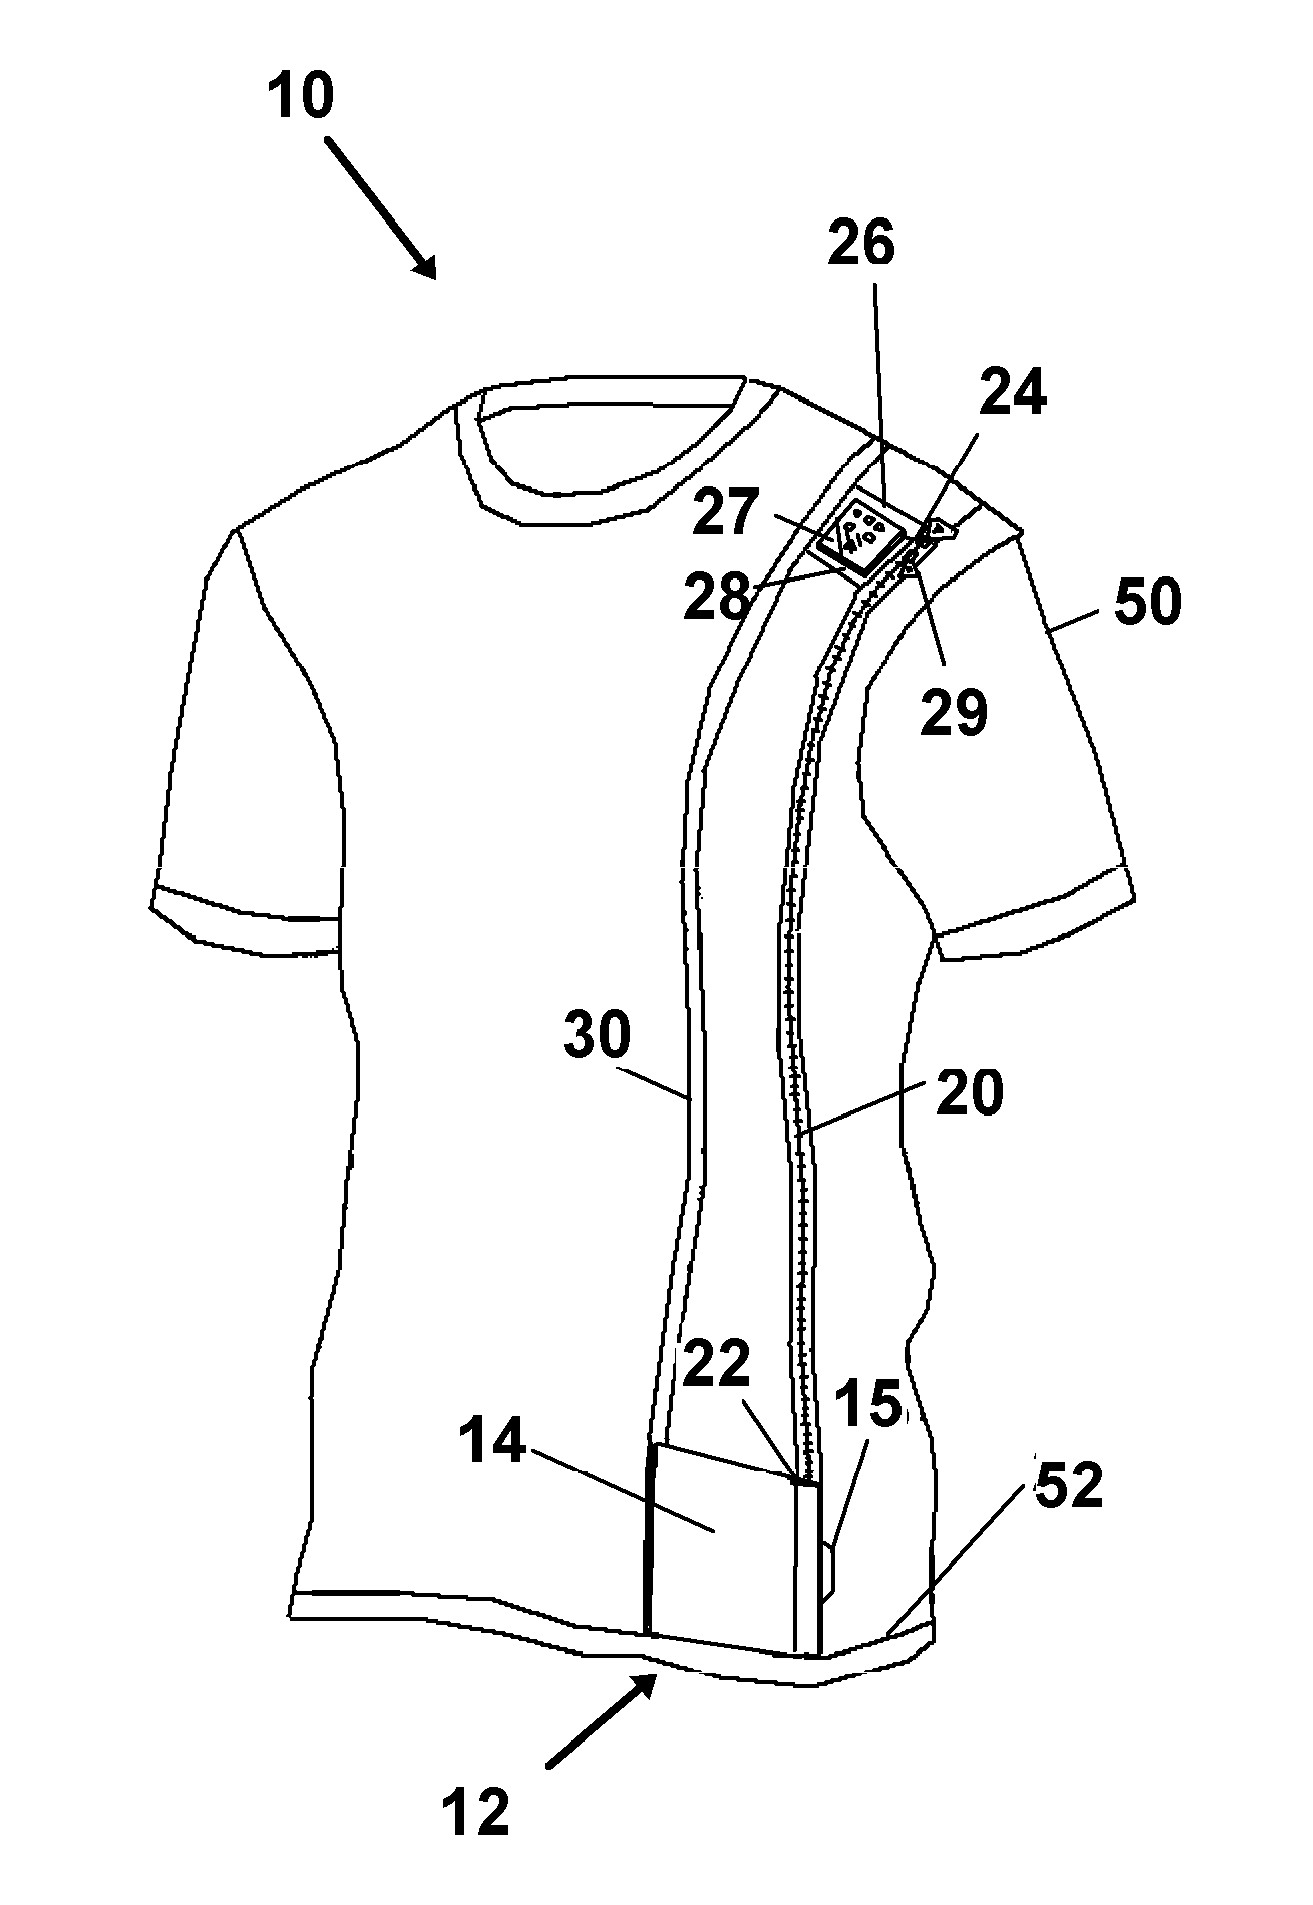 T-shirt Pocket for Touch Screen Mobile Devices